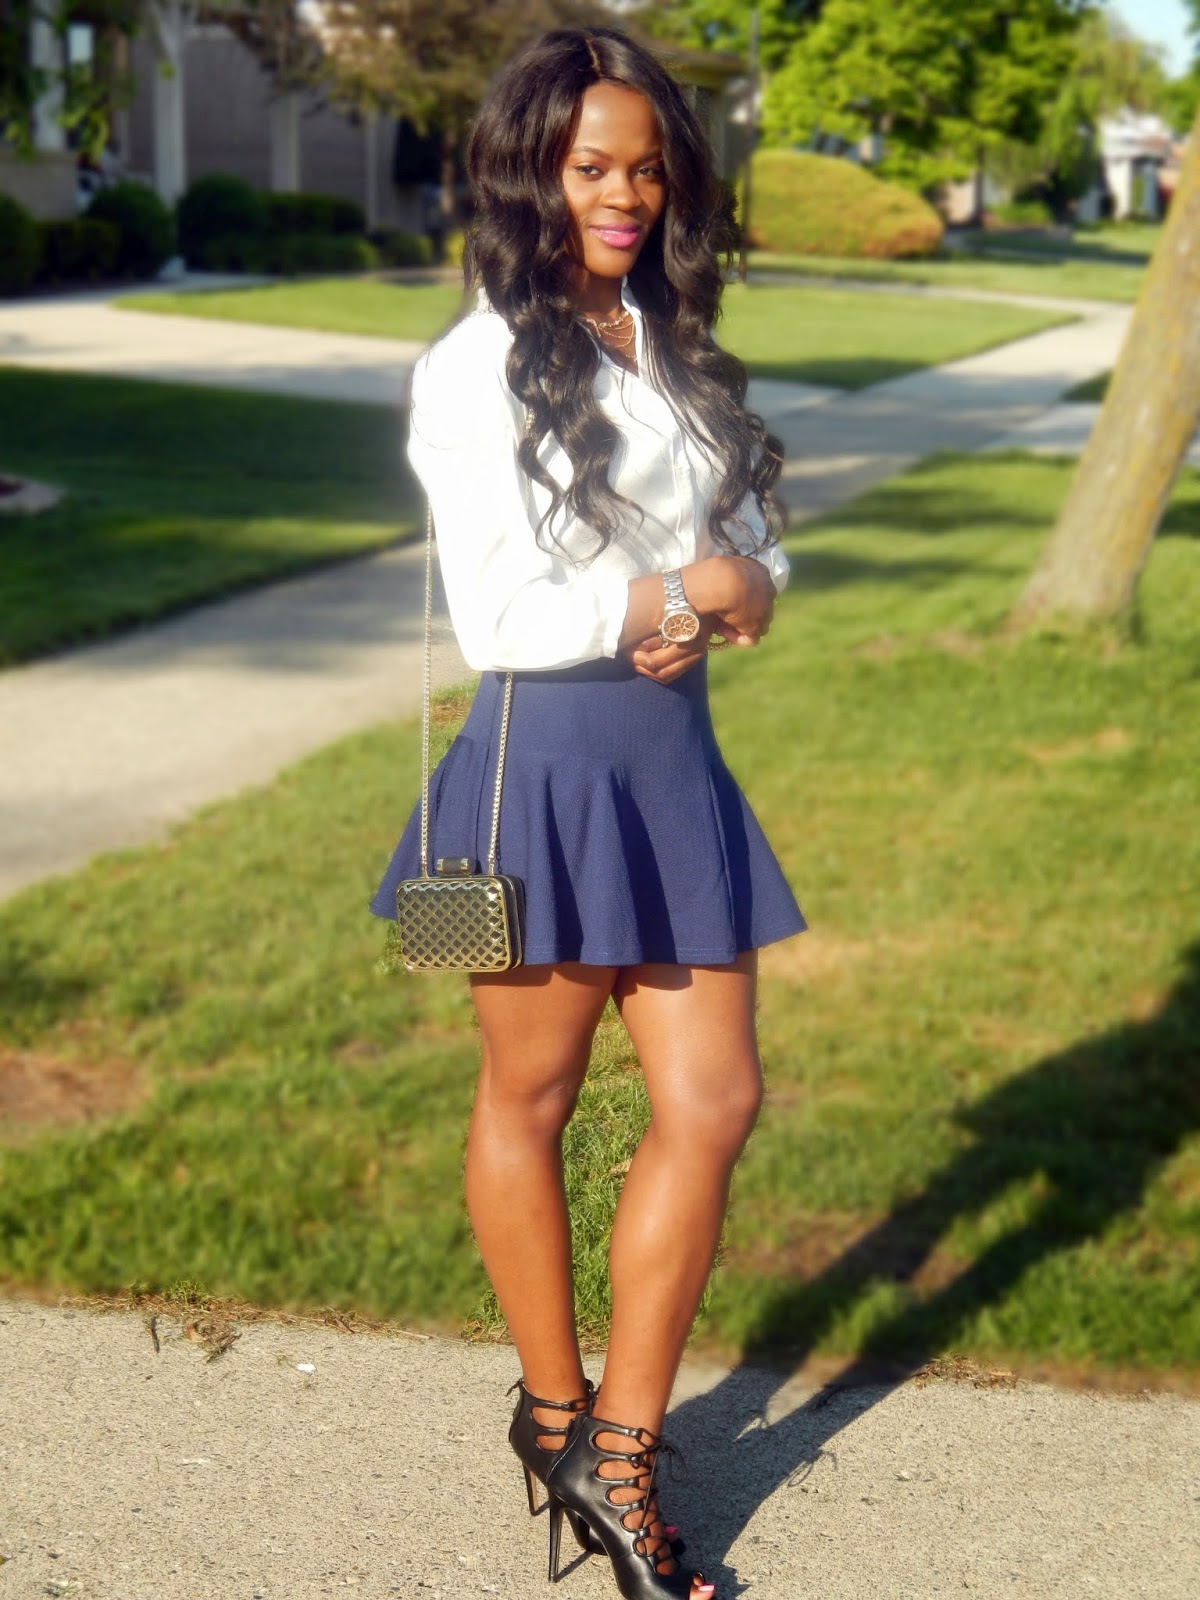 Date night: White Blouse and Skater Skirt - Cranberry Tantrums